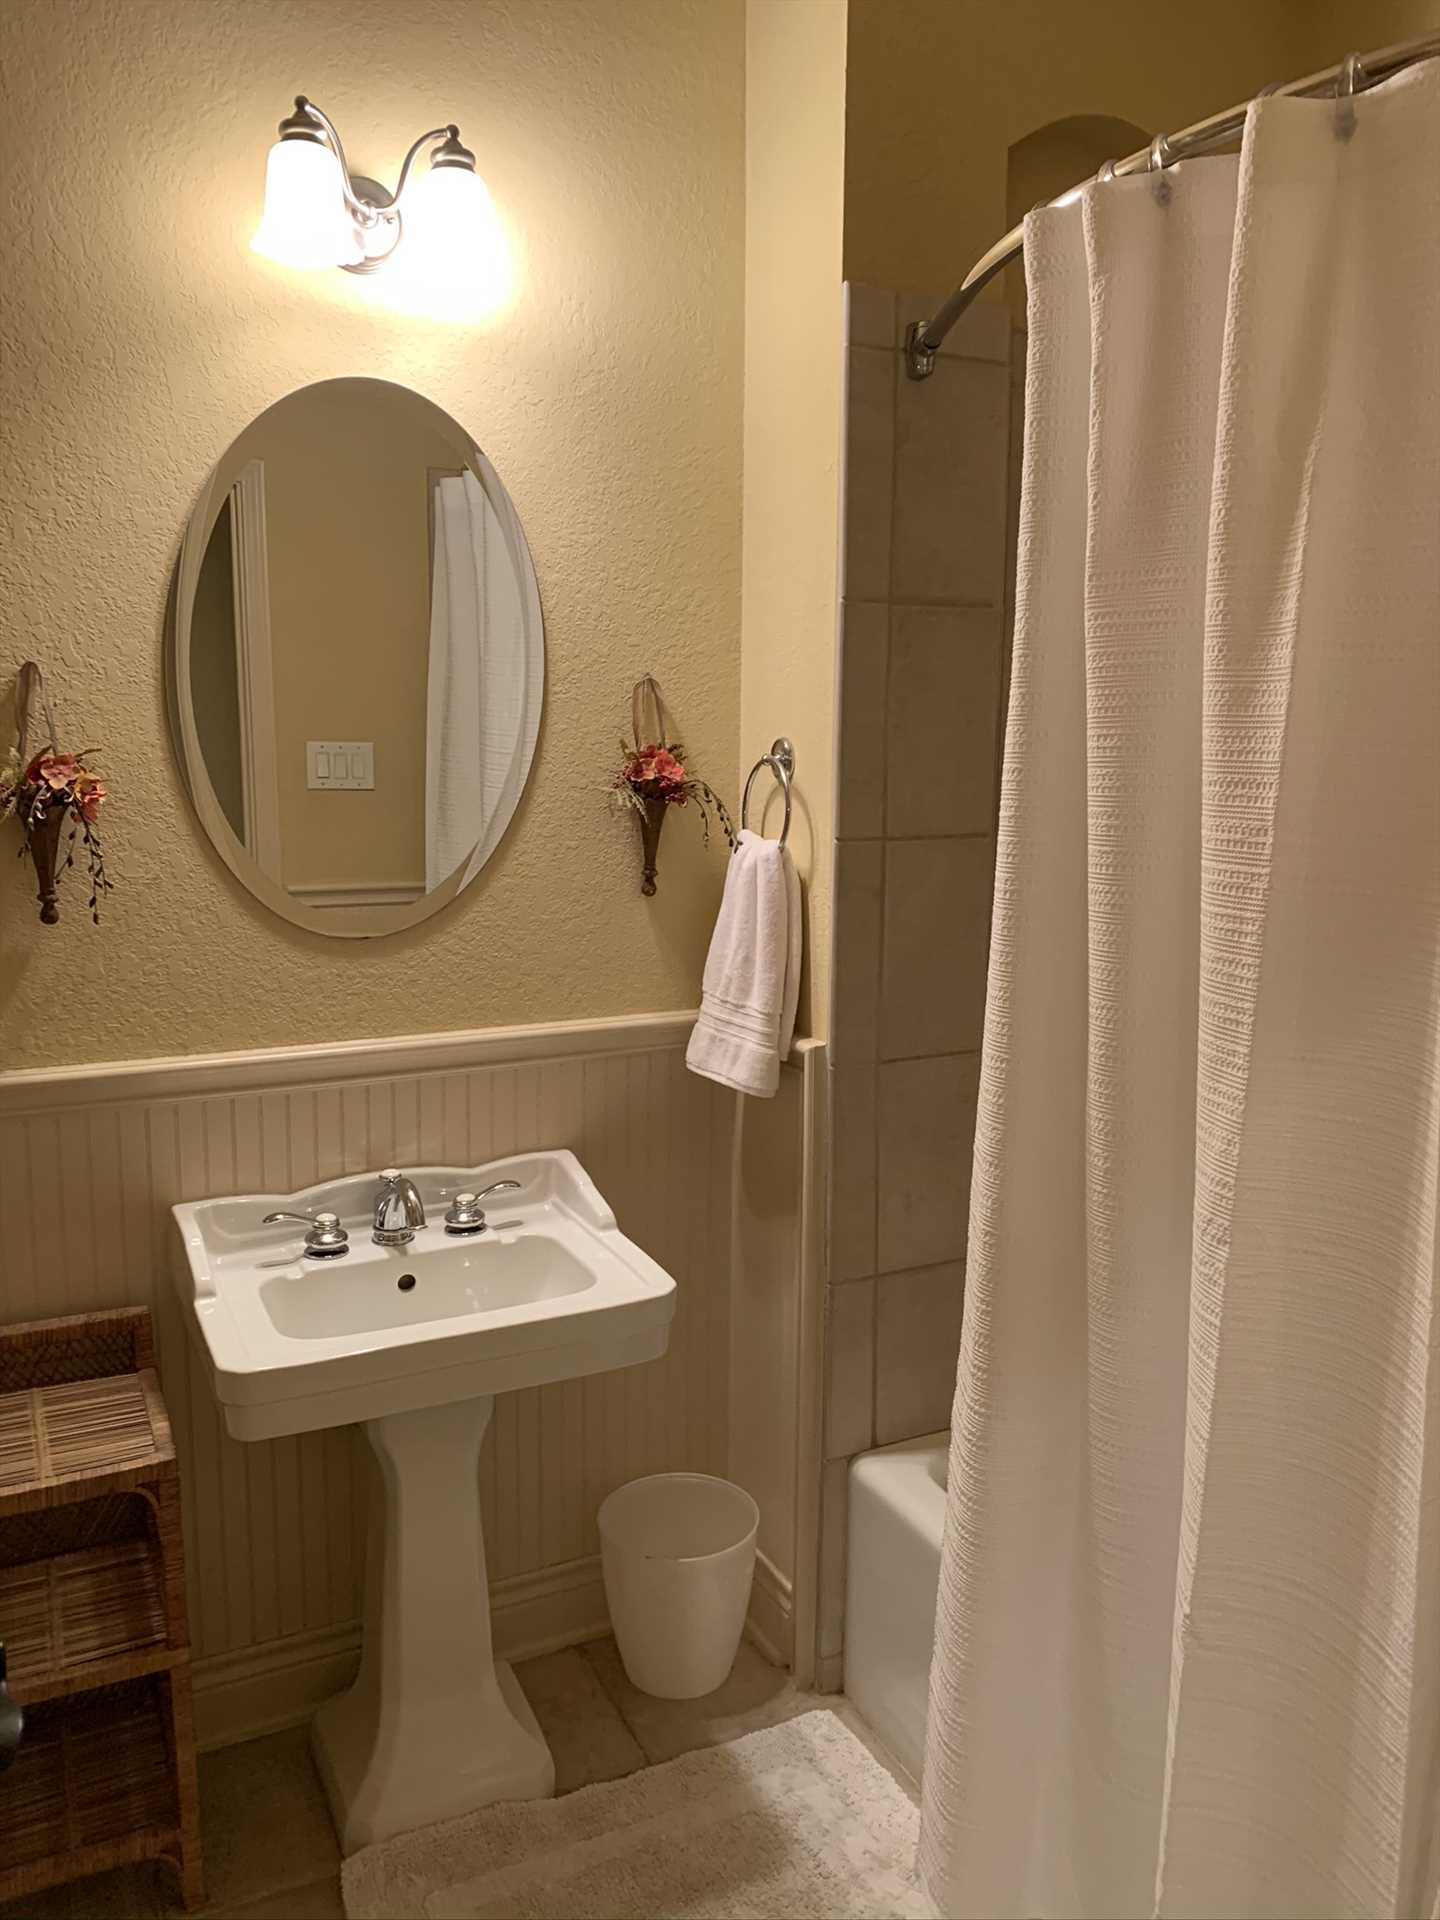                                                 A second full bath, with a shower and tub combo, is located in the hallway convenient to the second and third bedrooms.